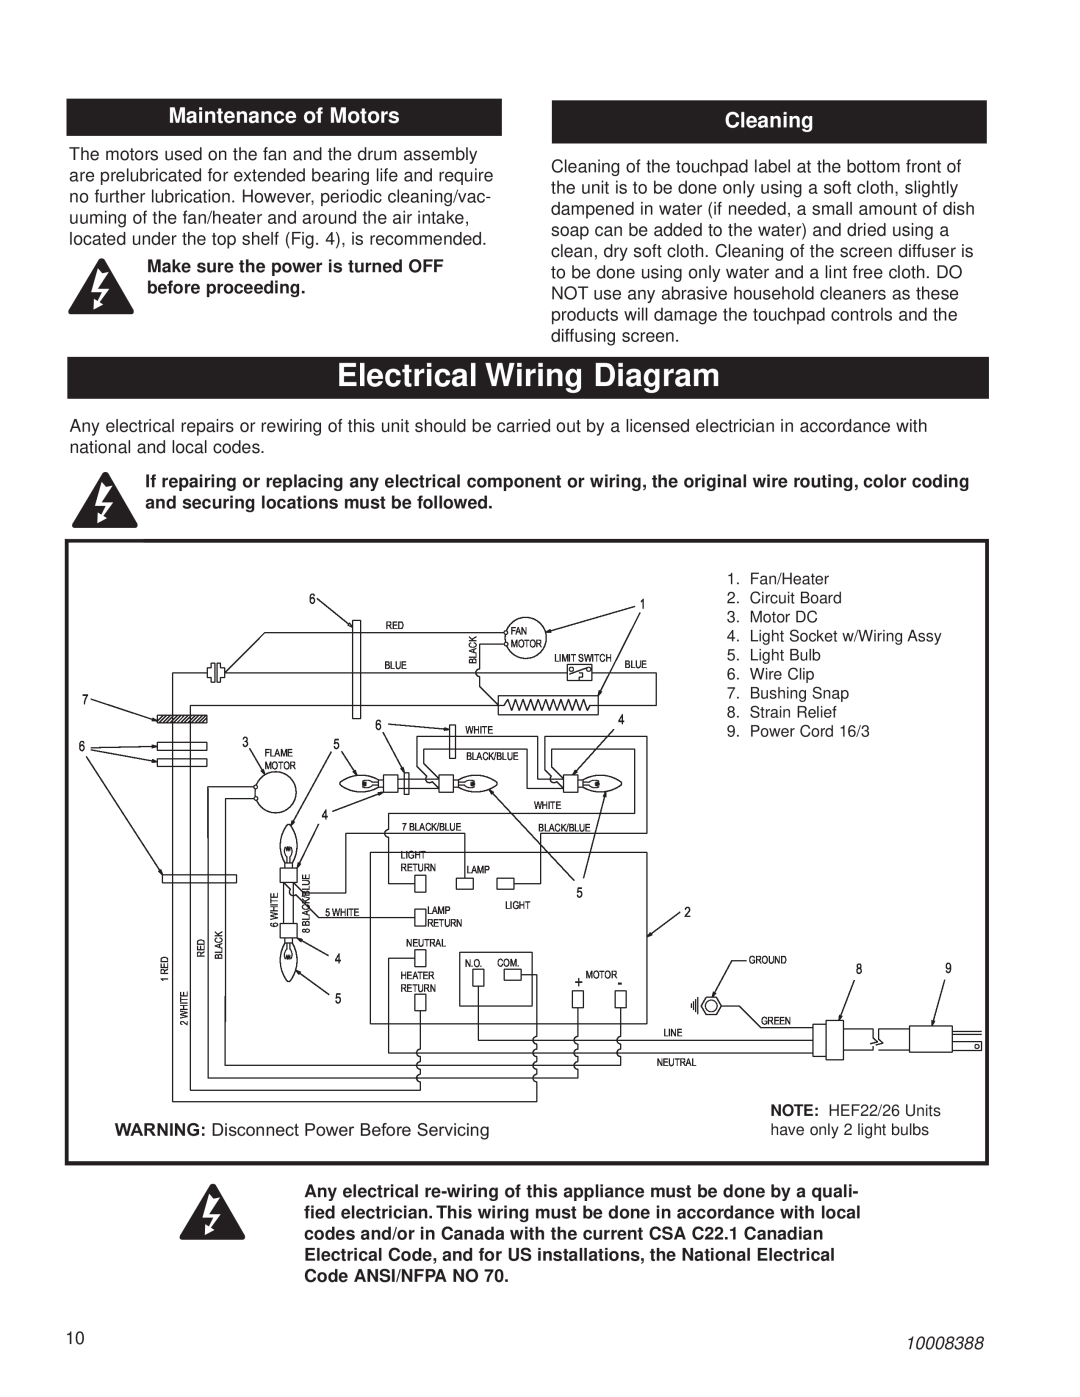 CFM Corporation HEF33, HEF26 installation instructions Electrical Wiring Diagram, Maintenance of Motors, Cleaning, 10008388 